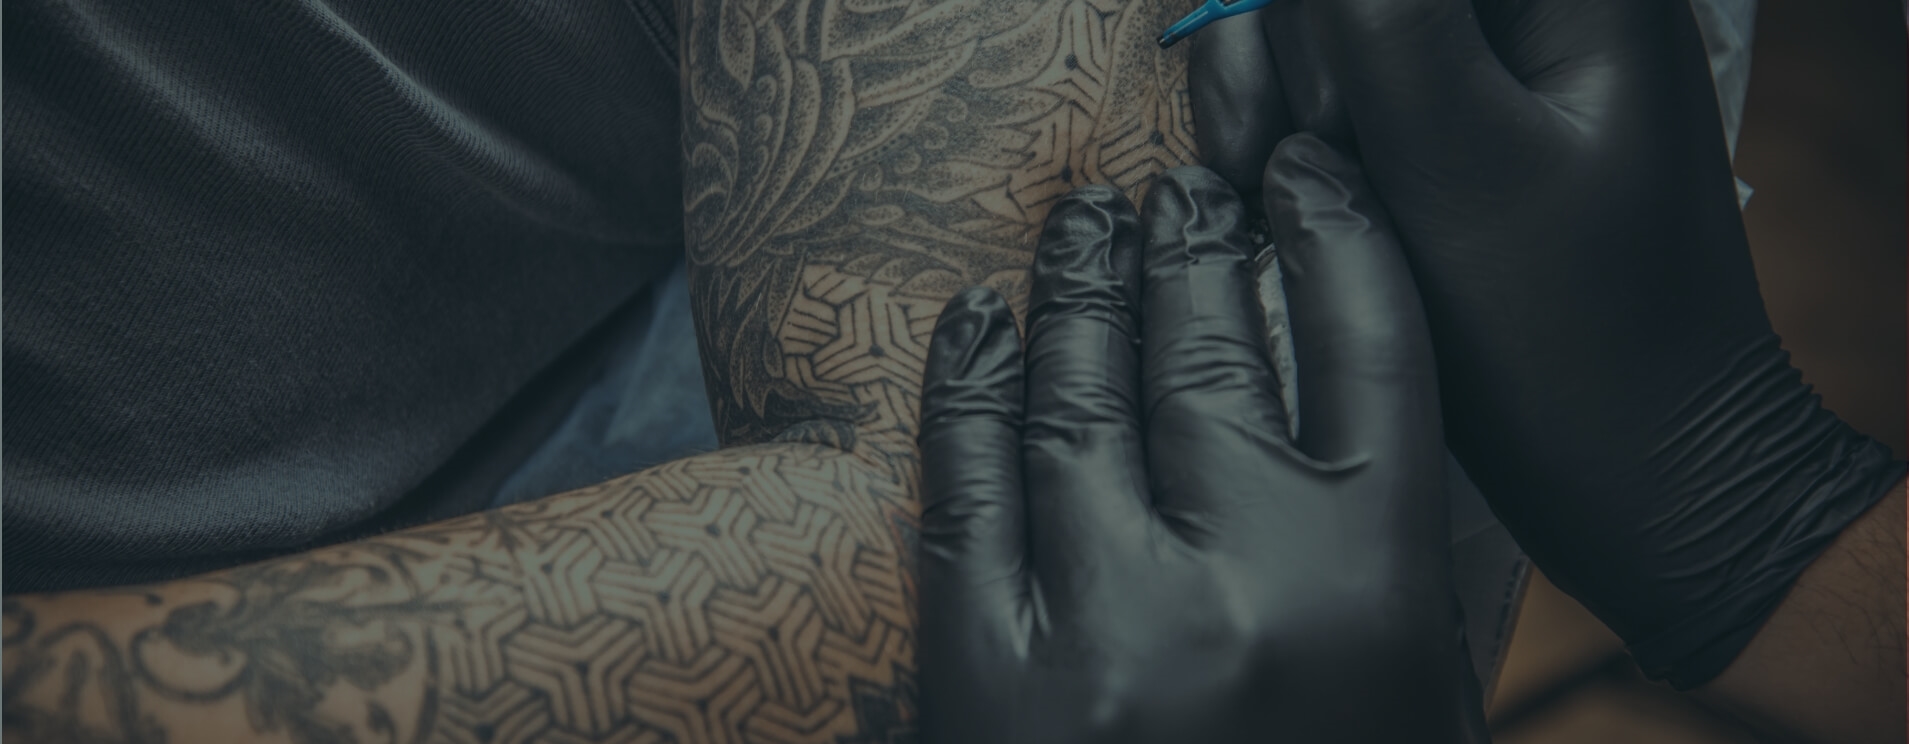 Arm candy alert!!! Tattoos the ultimate accessories get your's asap! . .  Book your consultation at +91 8745801112 . #tattoo #tattoos #i... |  Instagram